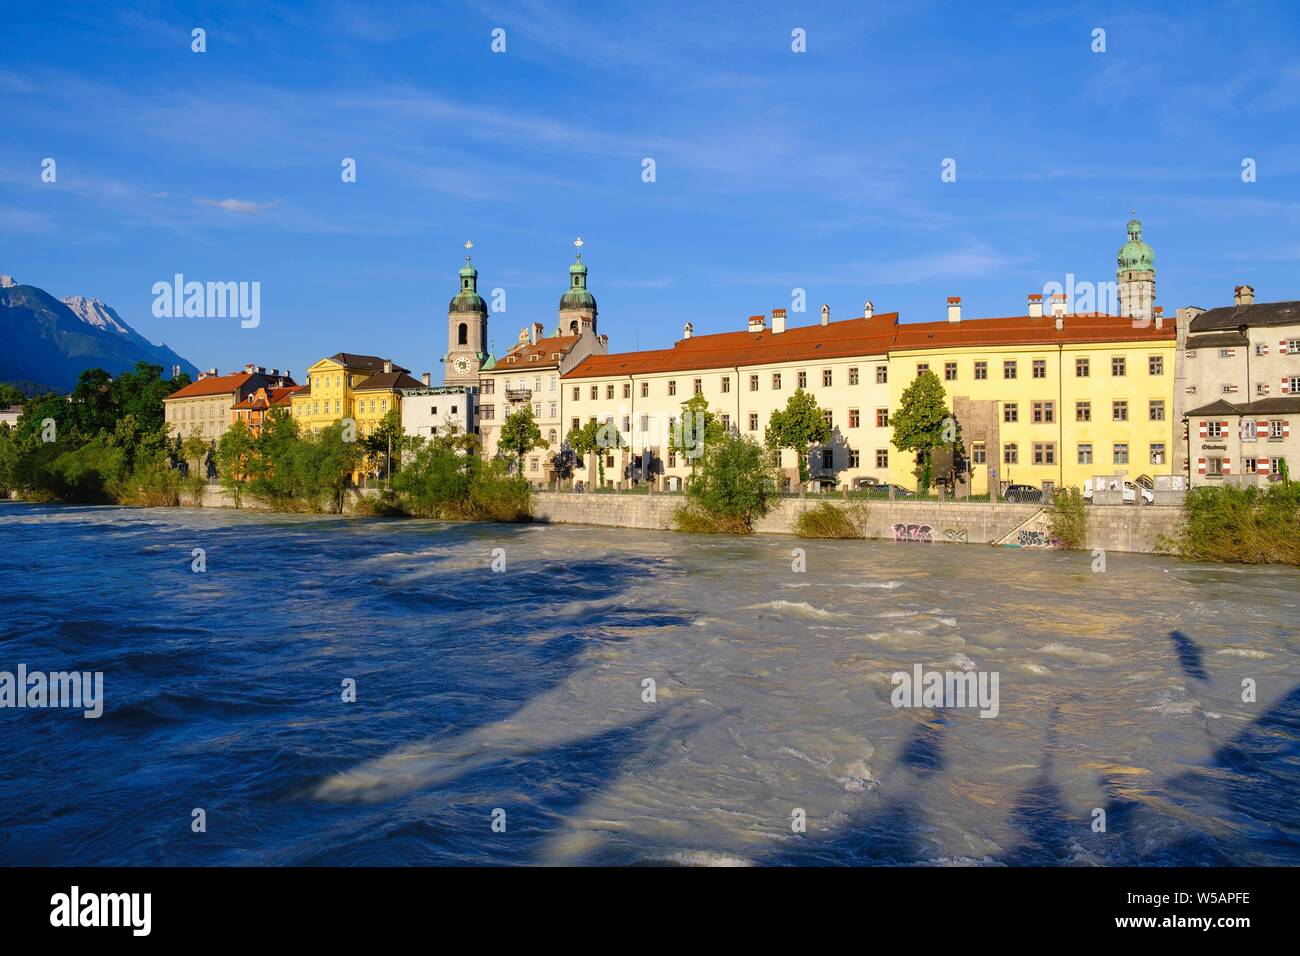 Inn with cathedral in Old Town, Innsbruck, Tyrol, Austria Stock Photo